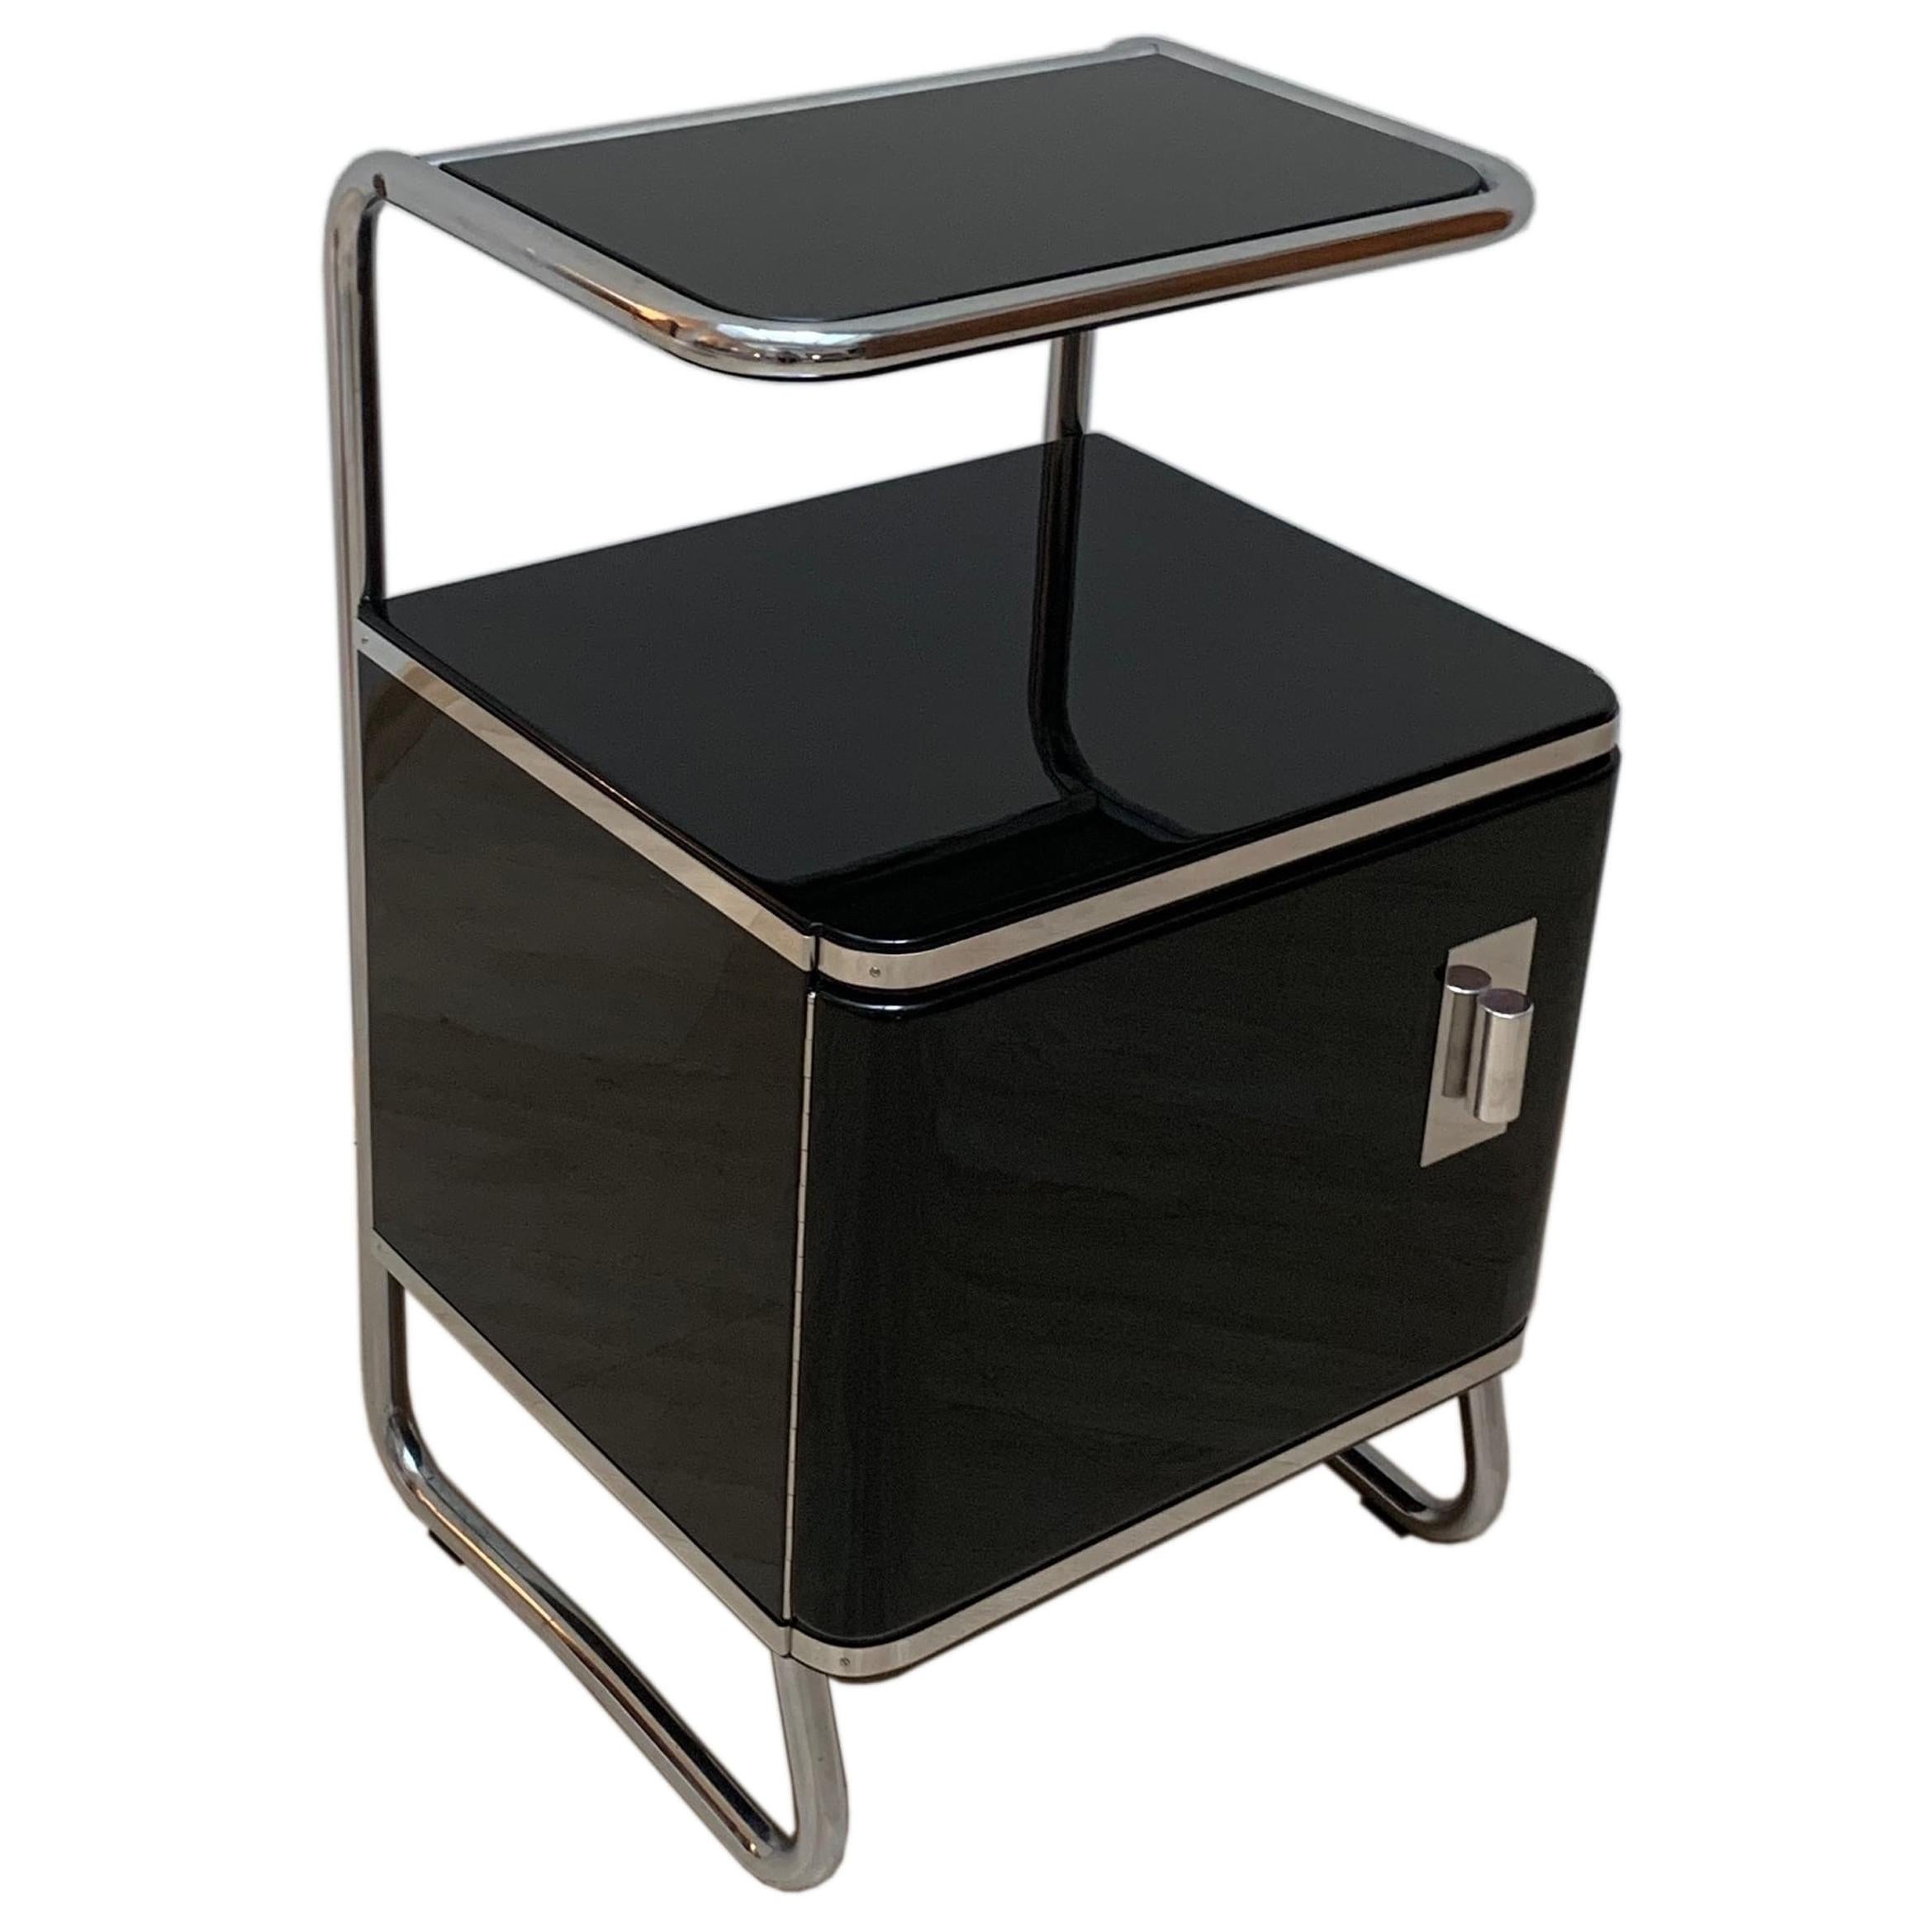 Bauhaus Nightstand, Steeltube and Black Lacquer, Germany circa 1930 at  1stDibs